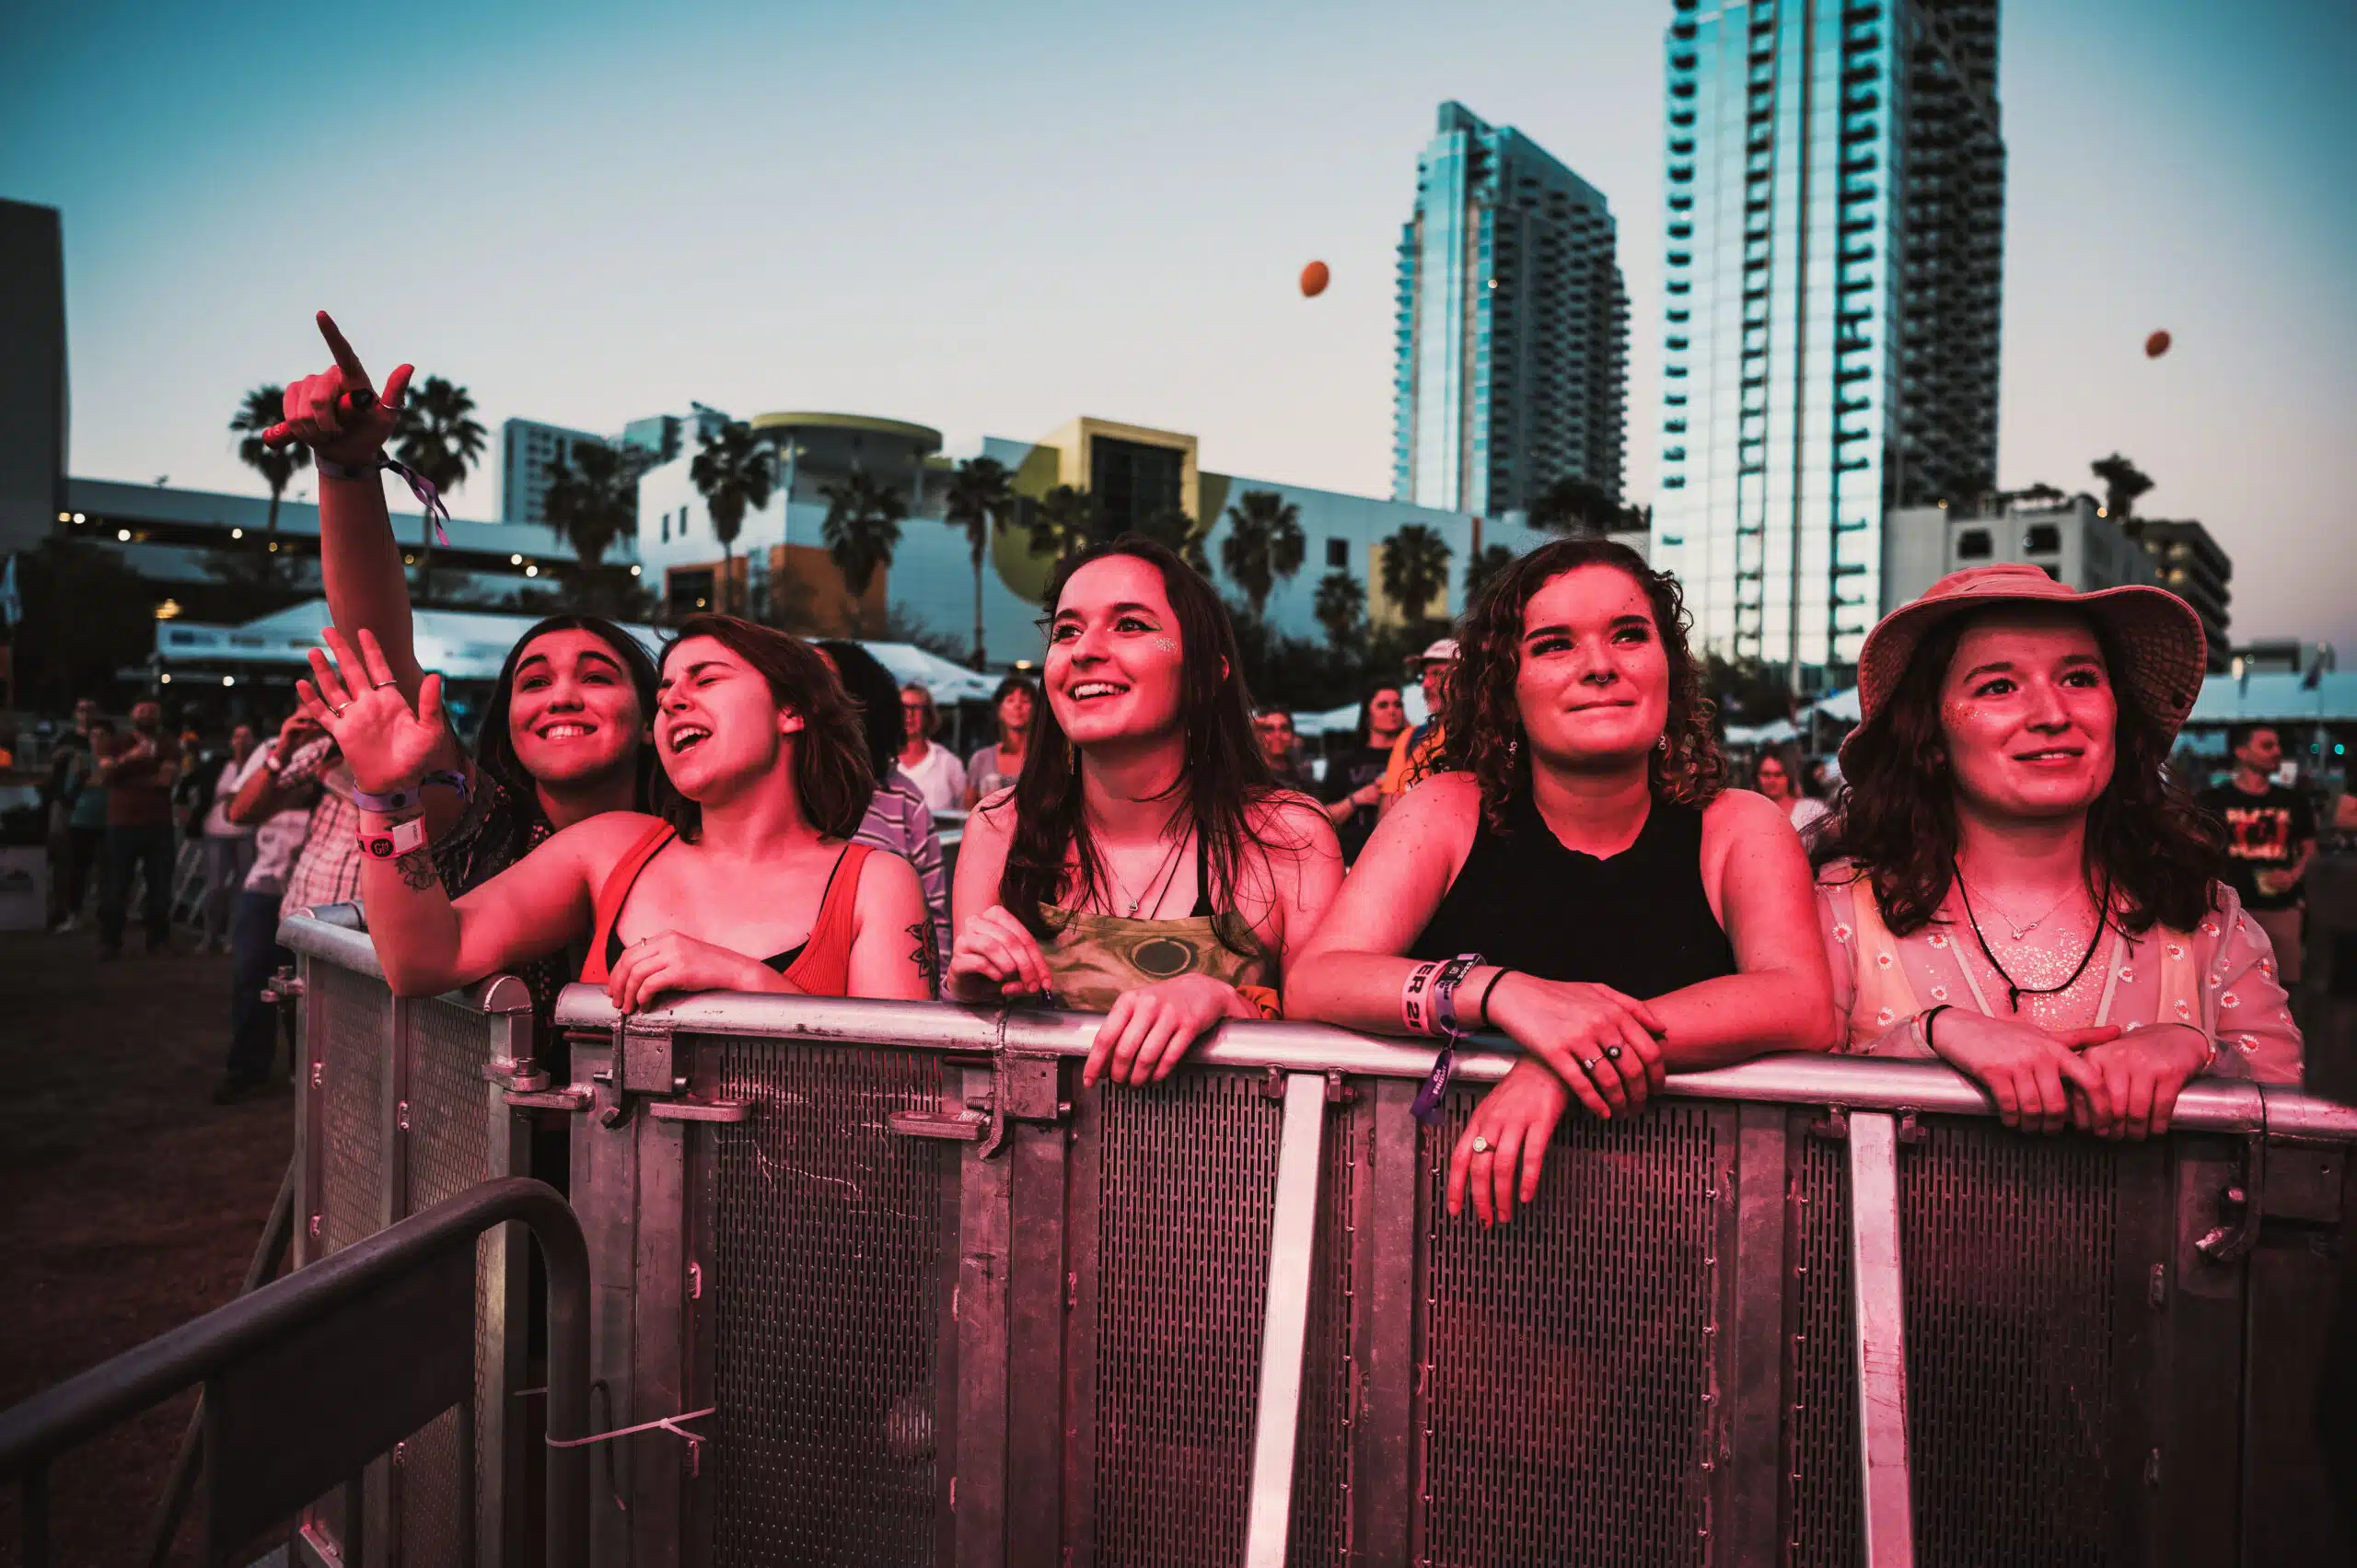 View of people watching the festival with the downtown Tampa skyline in the background